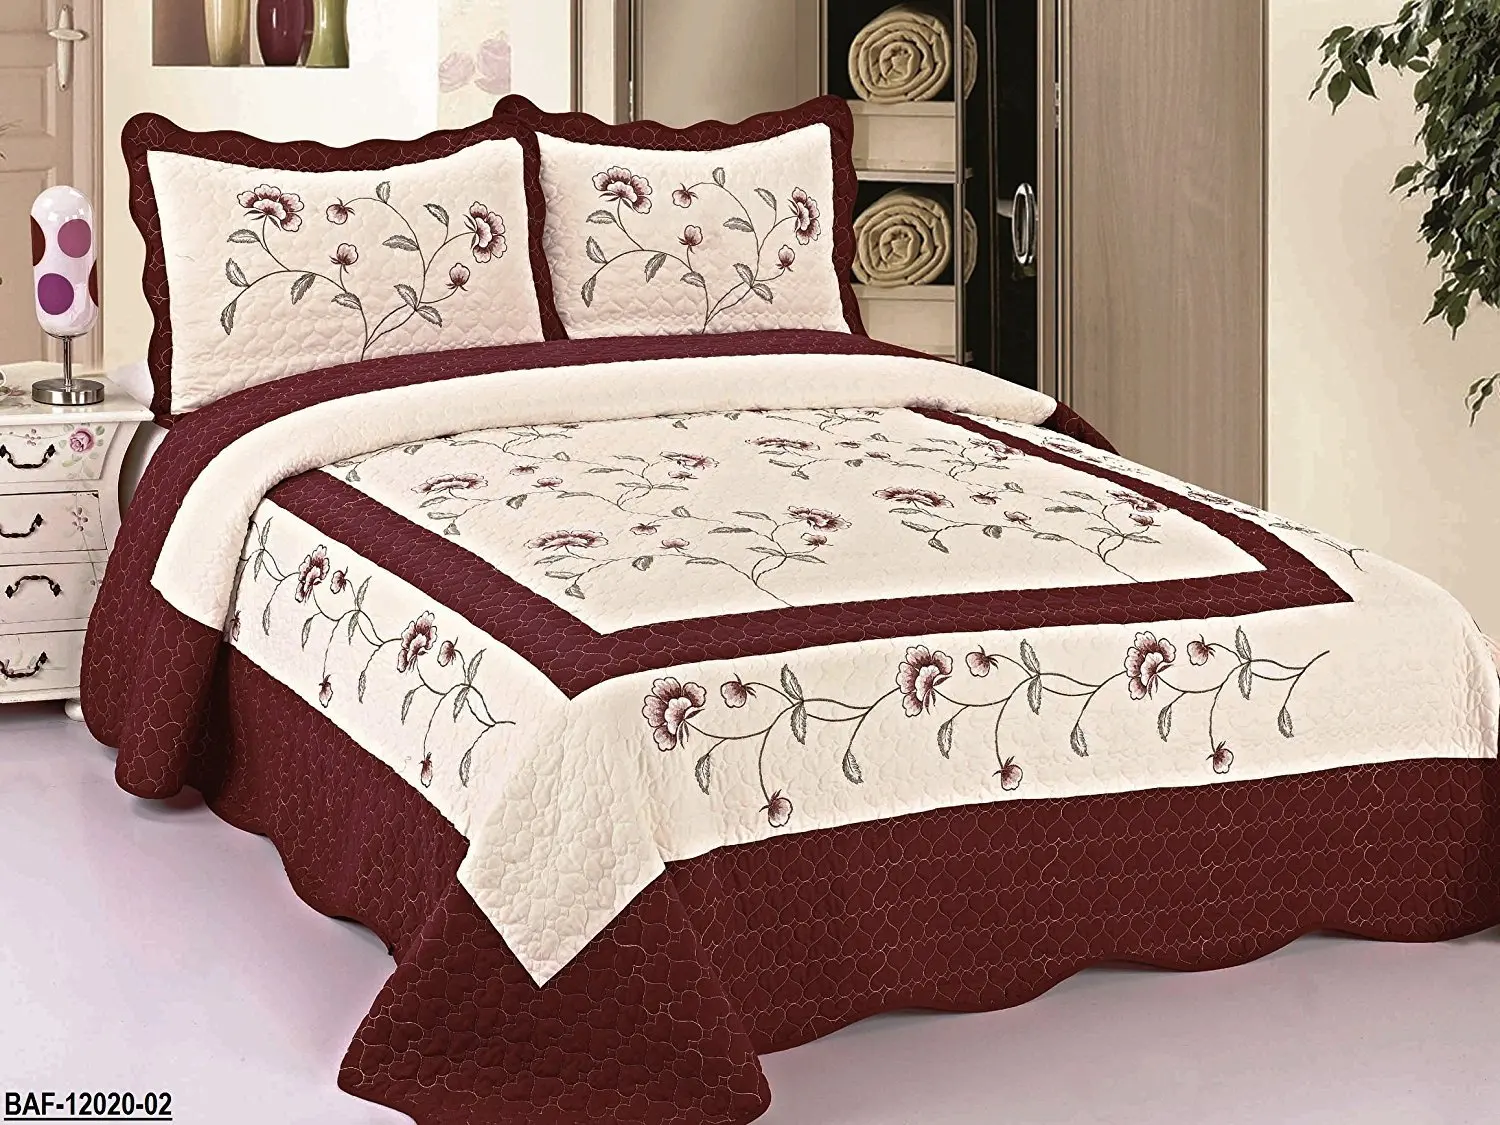 quality quilts and coverlets